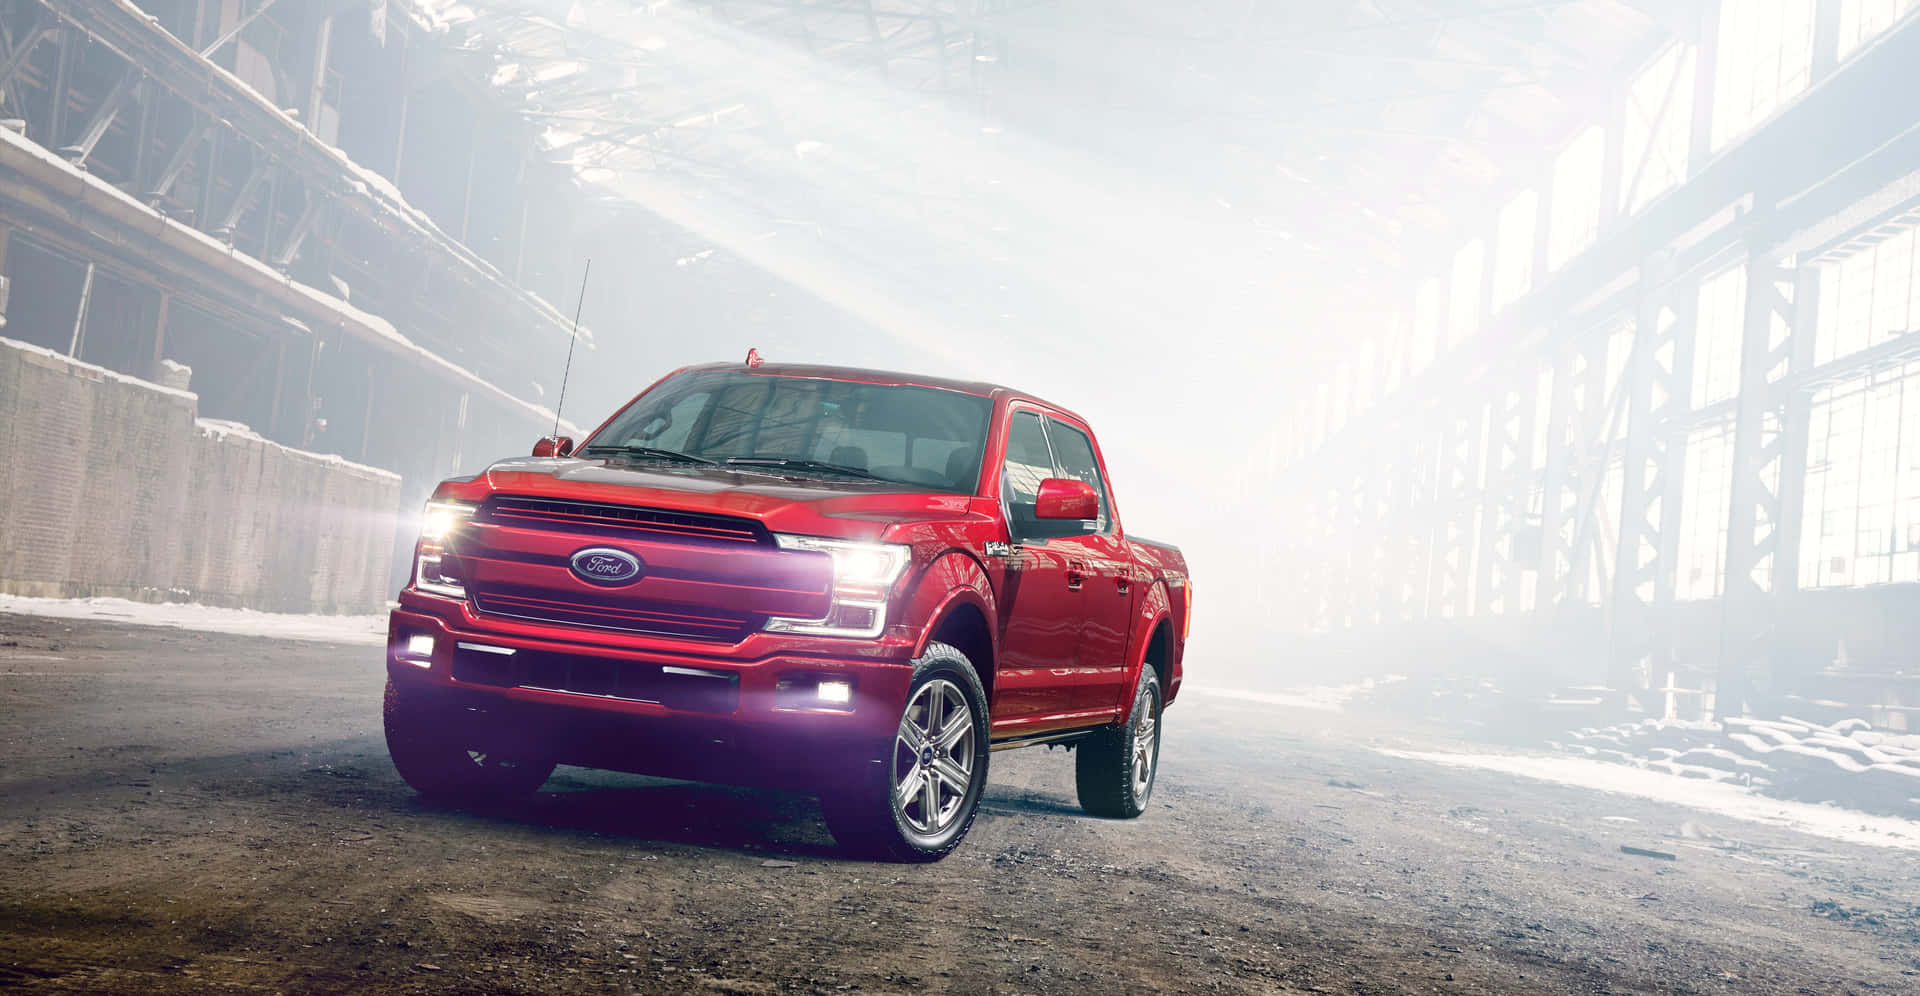 The Red Ford F-150 Is Driving Through An Industrial Building Background